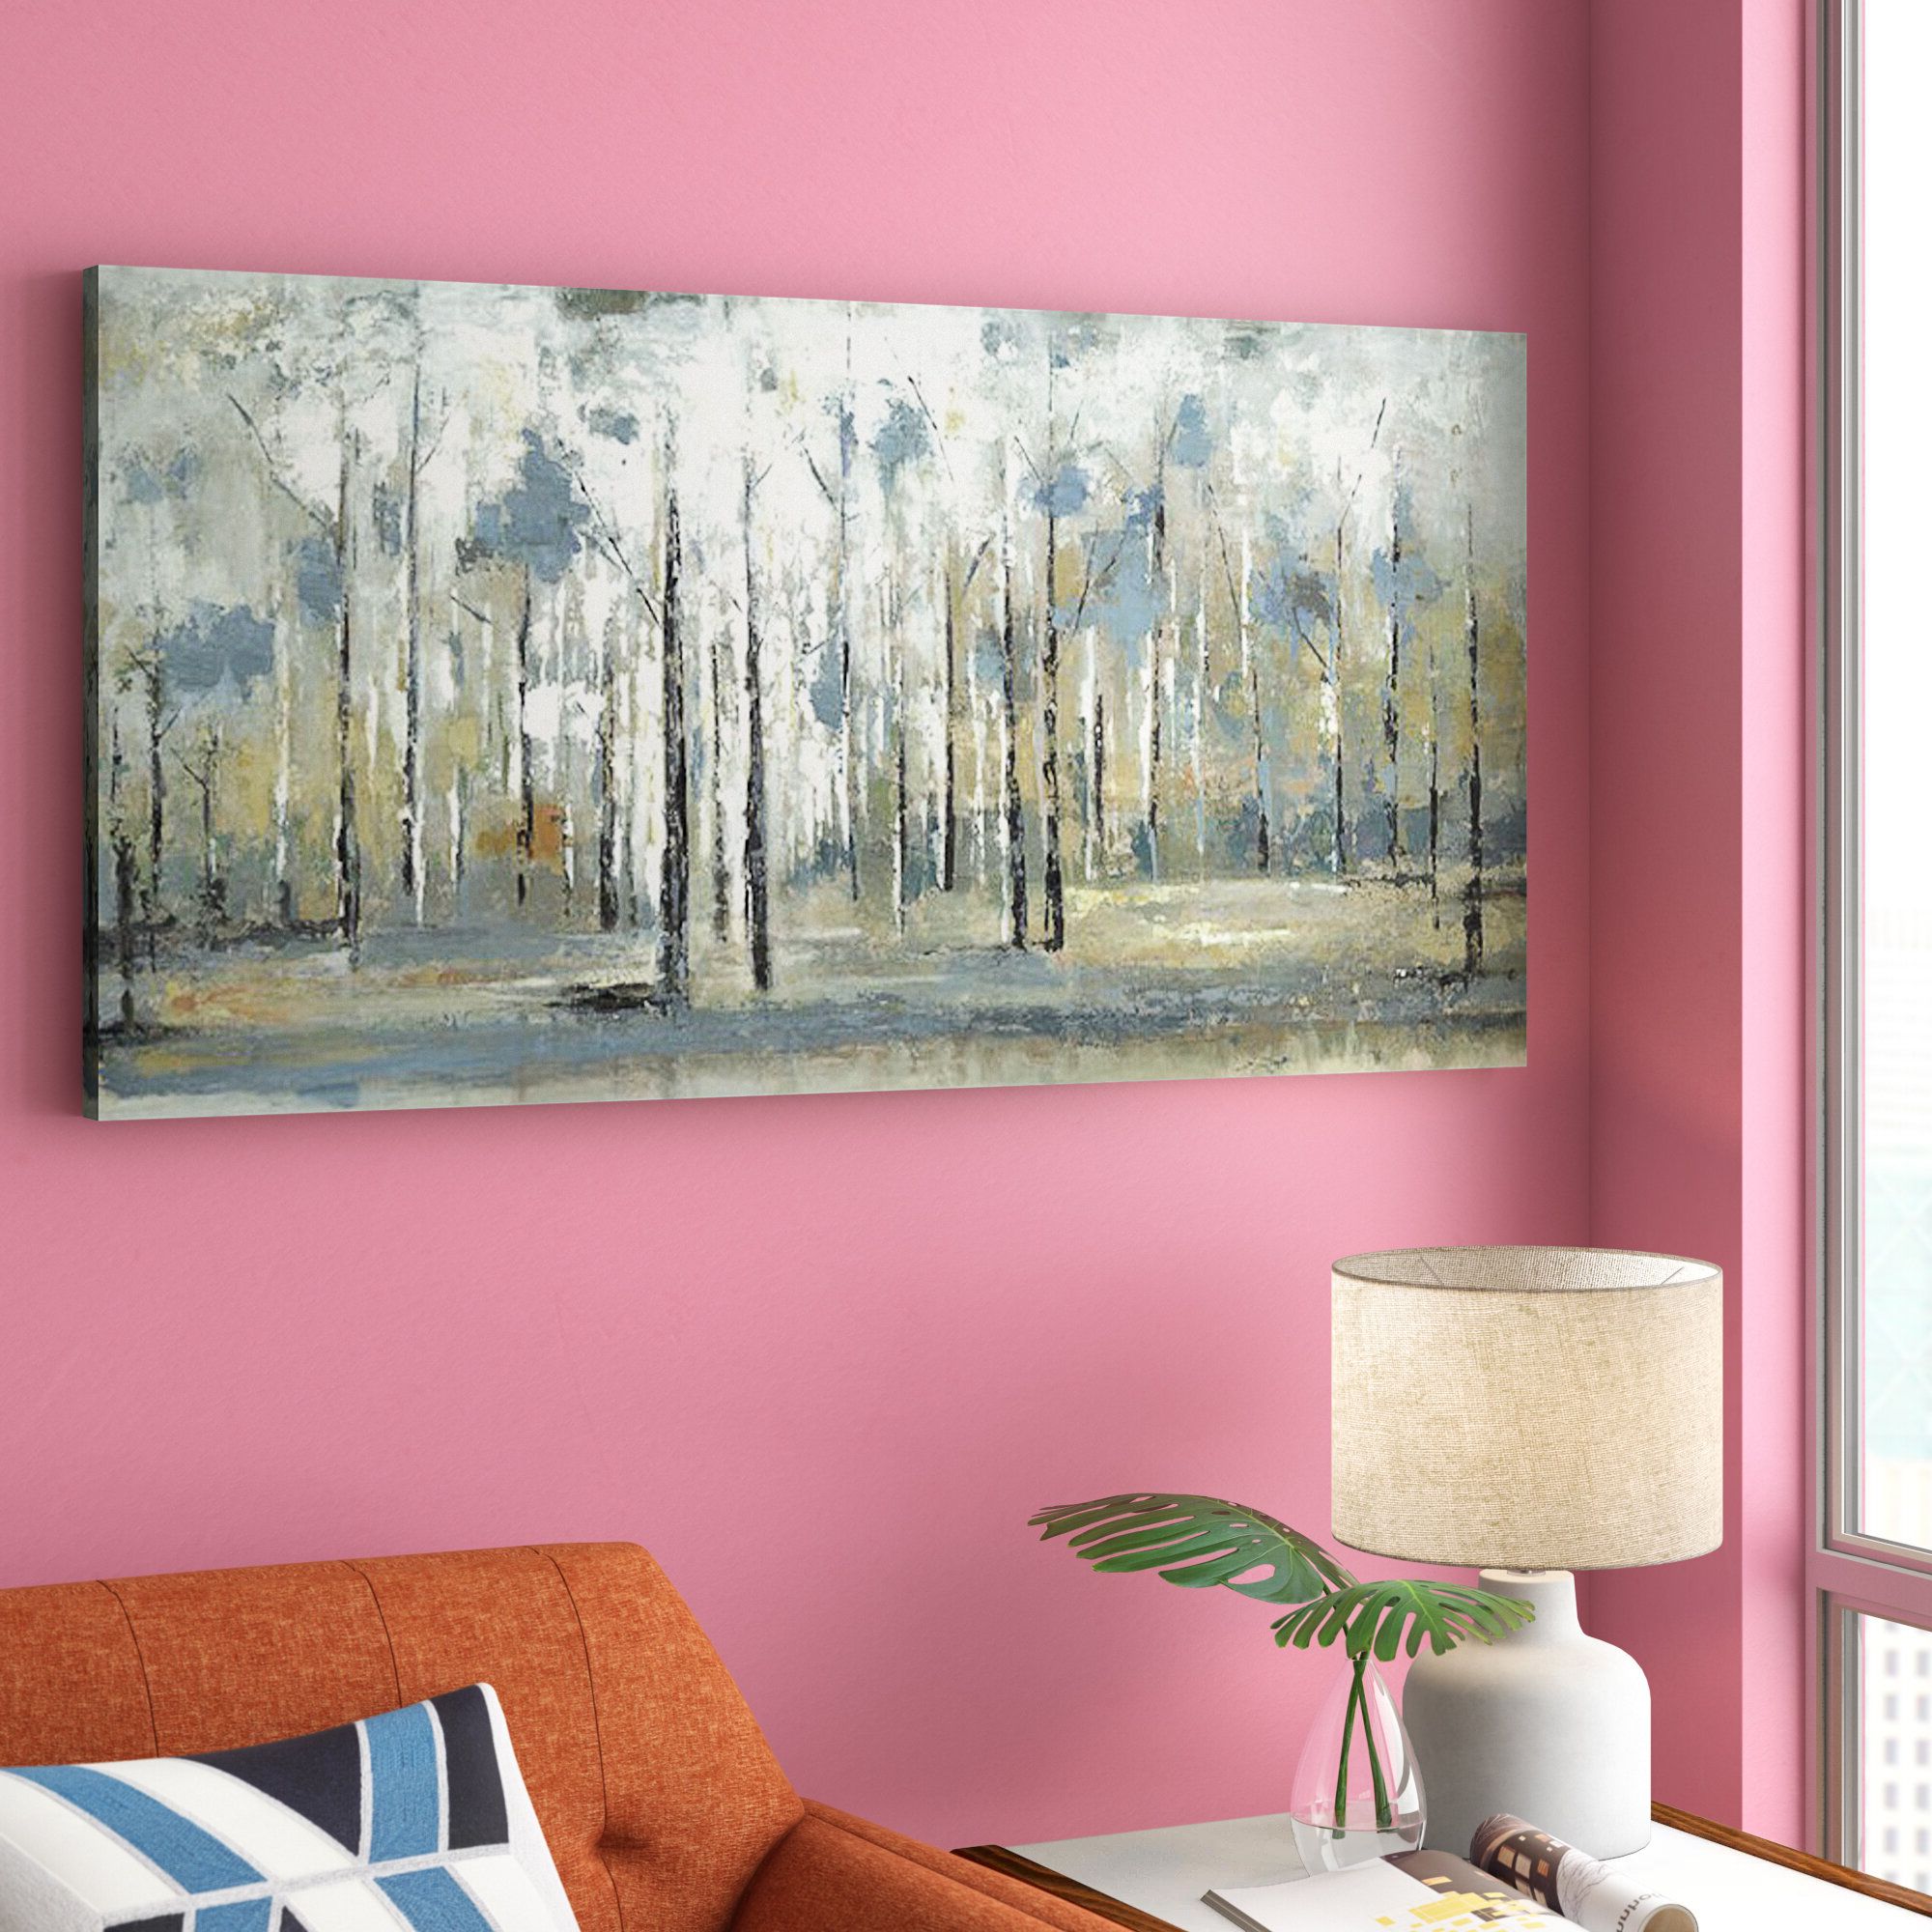 Wayfair Within Colorful Branching Wall Art (View 7 of 15)